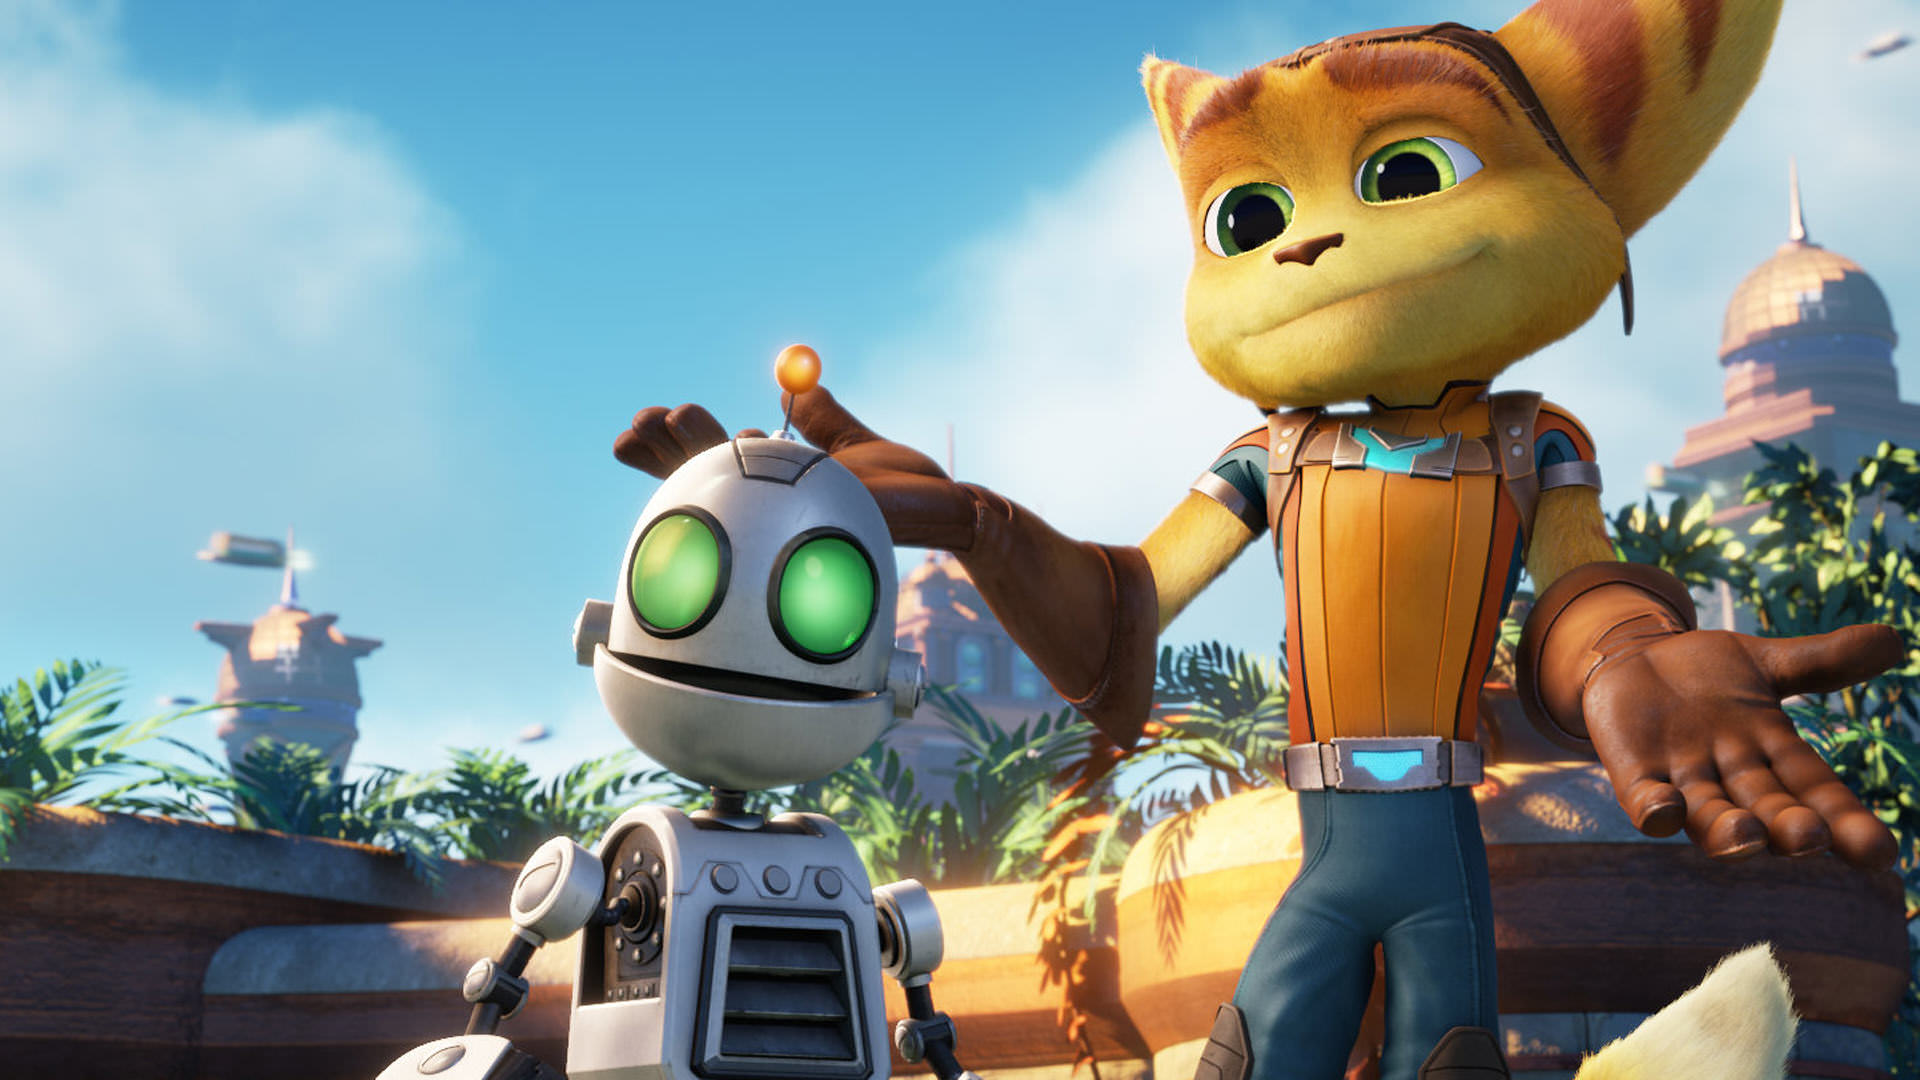 Ratchet And Clank Has An Official Trailer! What Video Games Movies Are Actually Good?